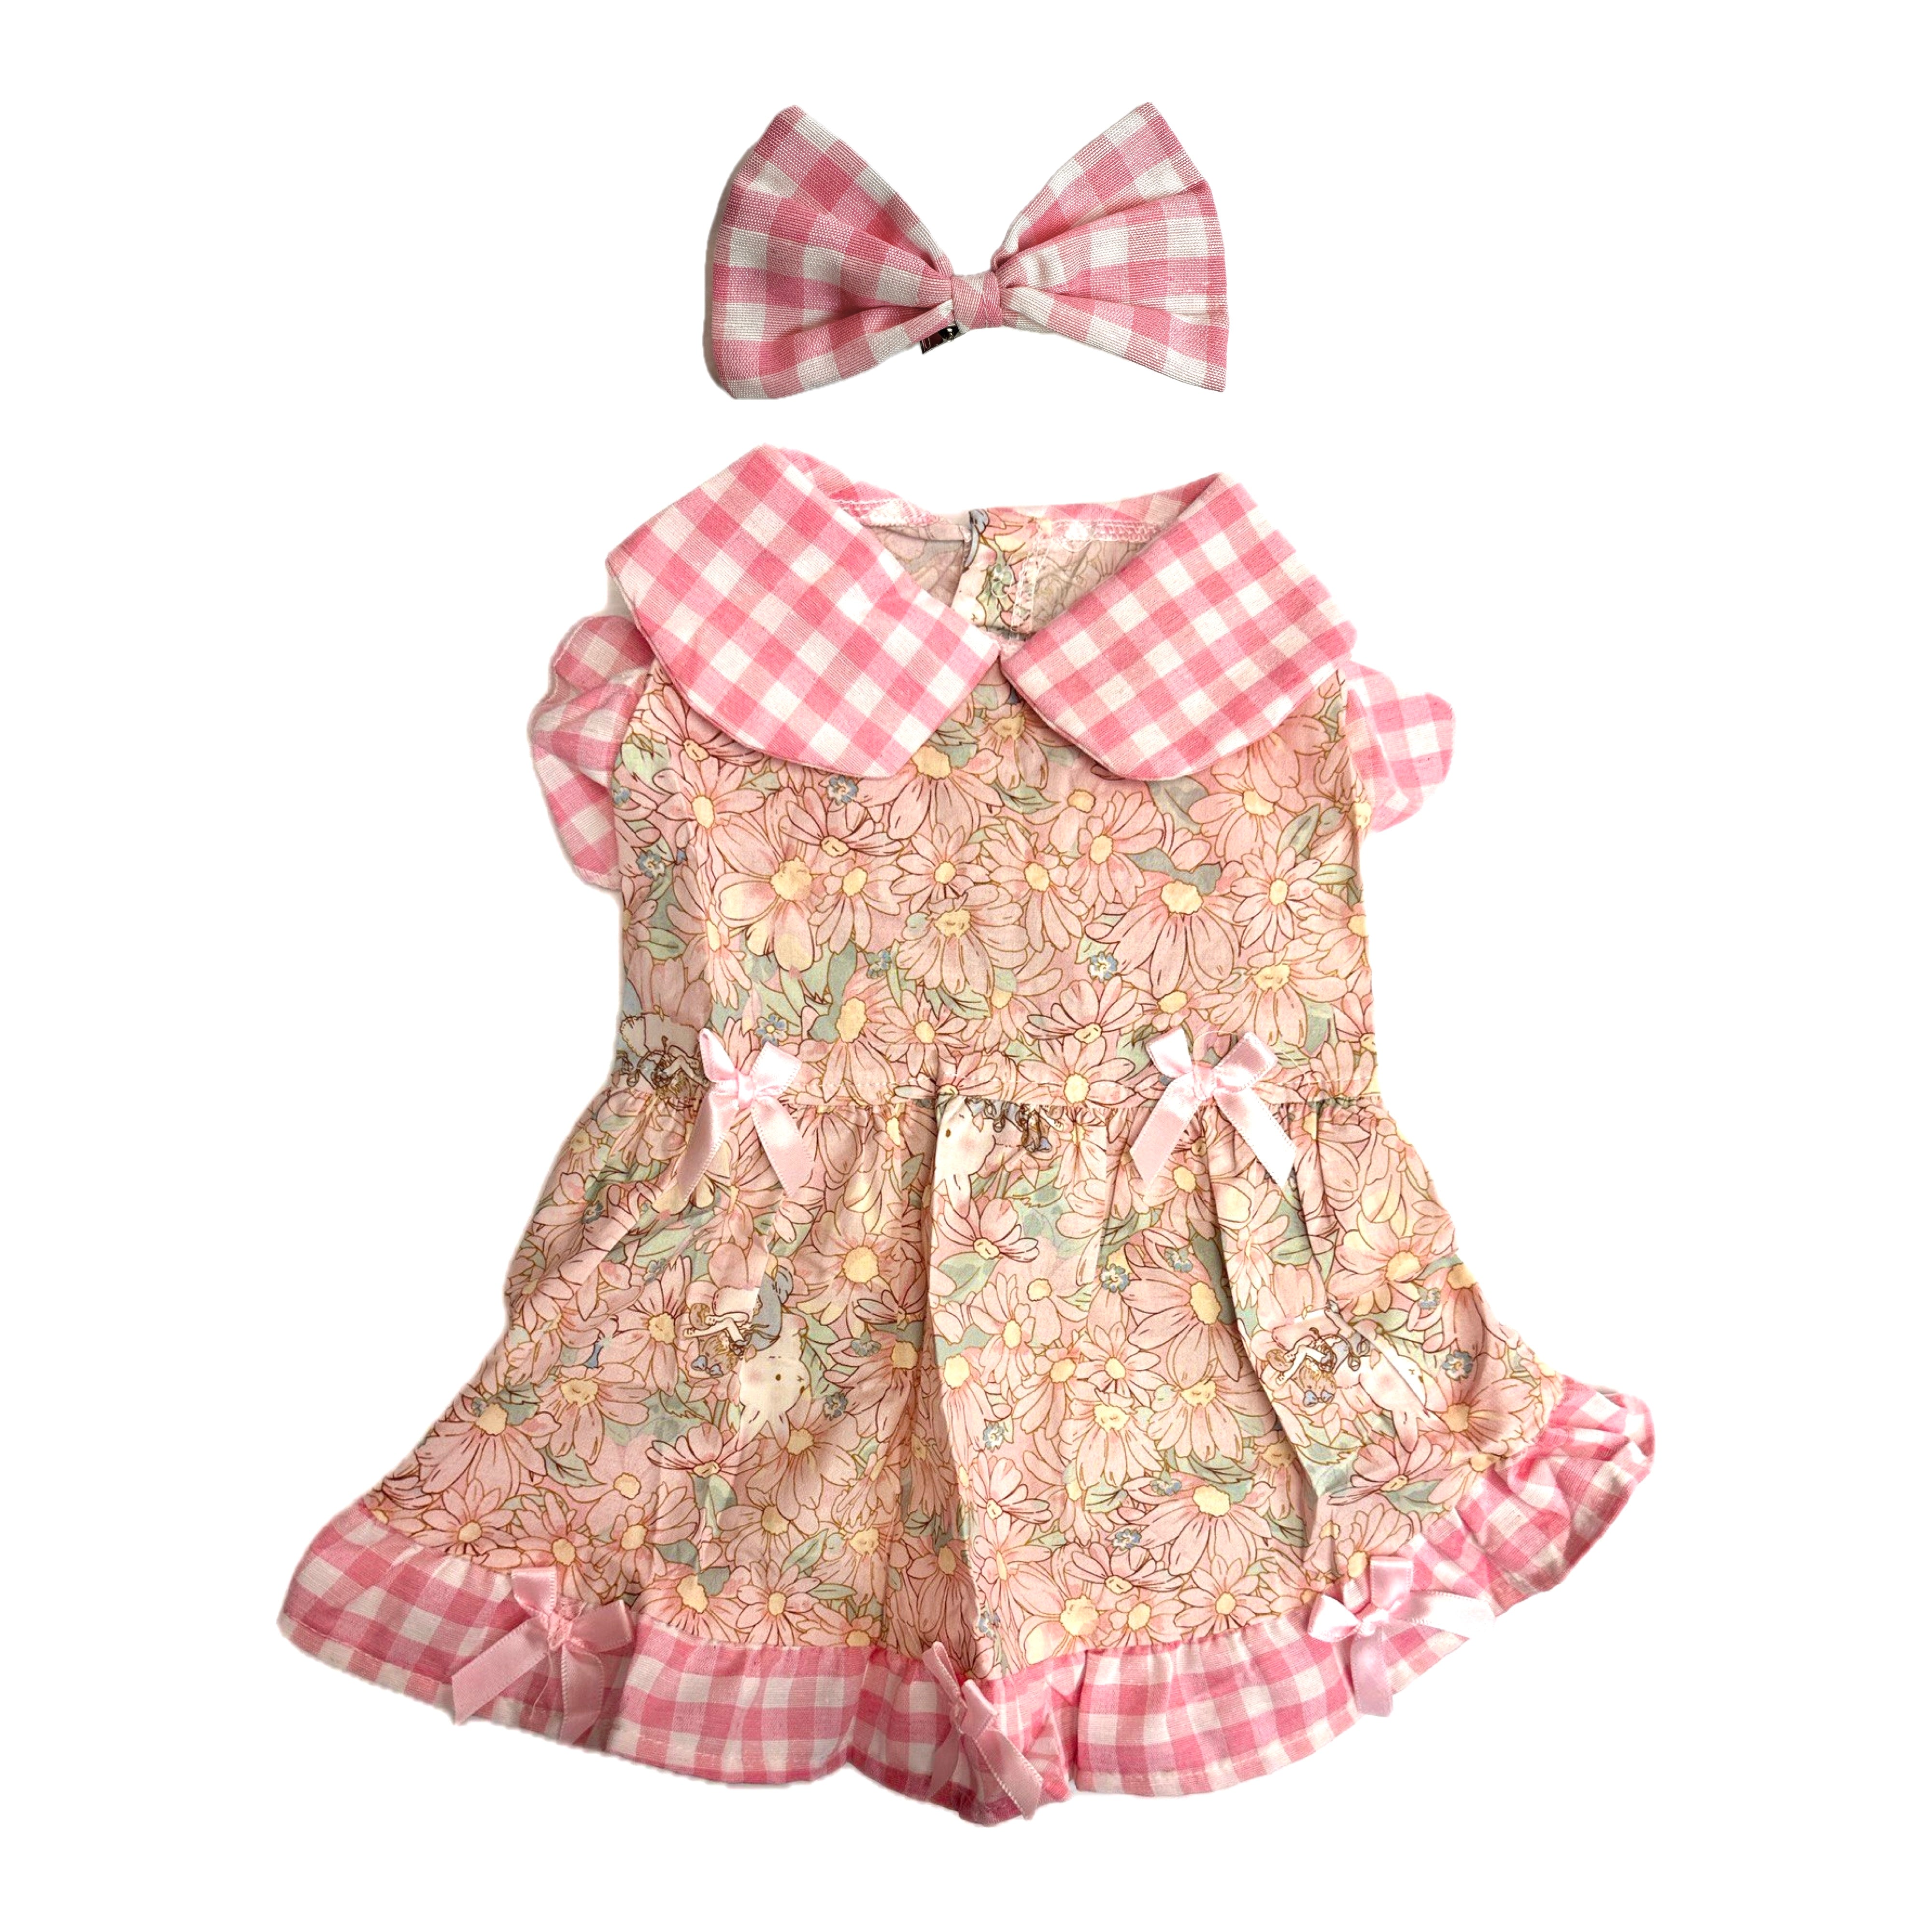 2pc Floral & Plaid Dress with Clip on Bow